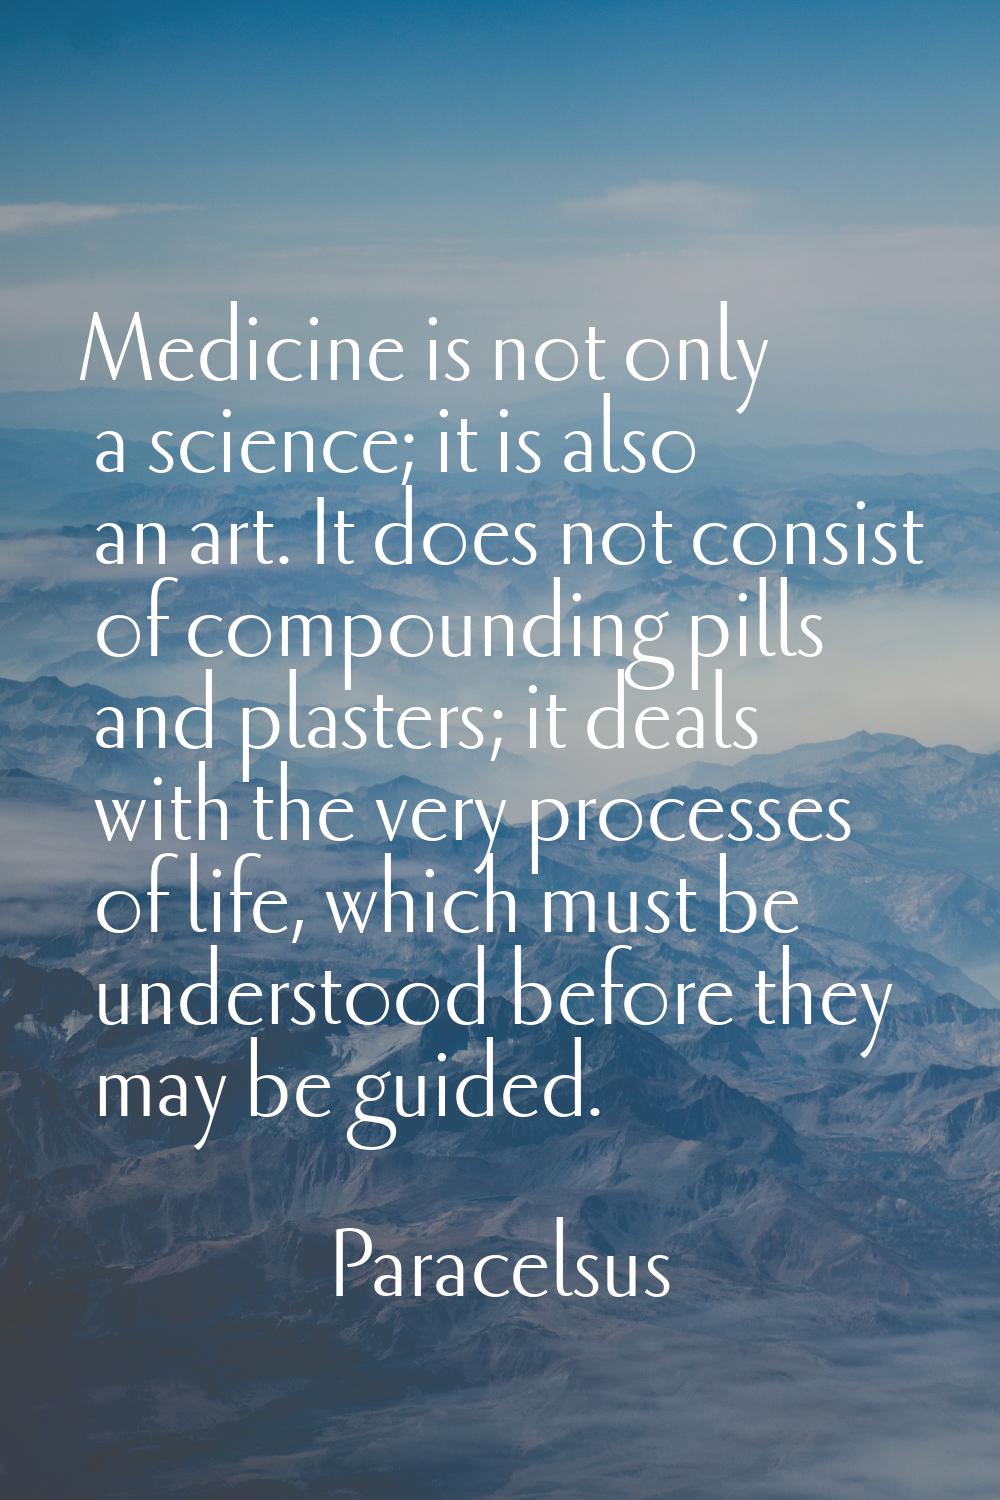 Medicine is not only a science; it is also an art. It does not consist of compounding pills and pla